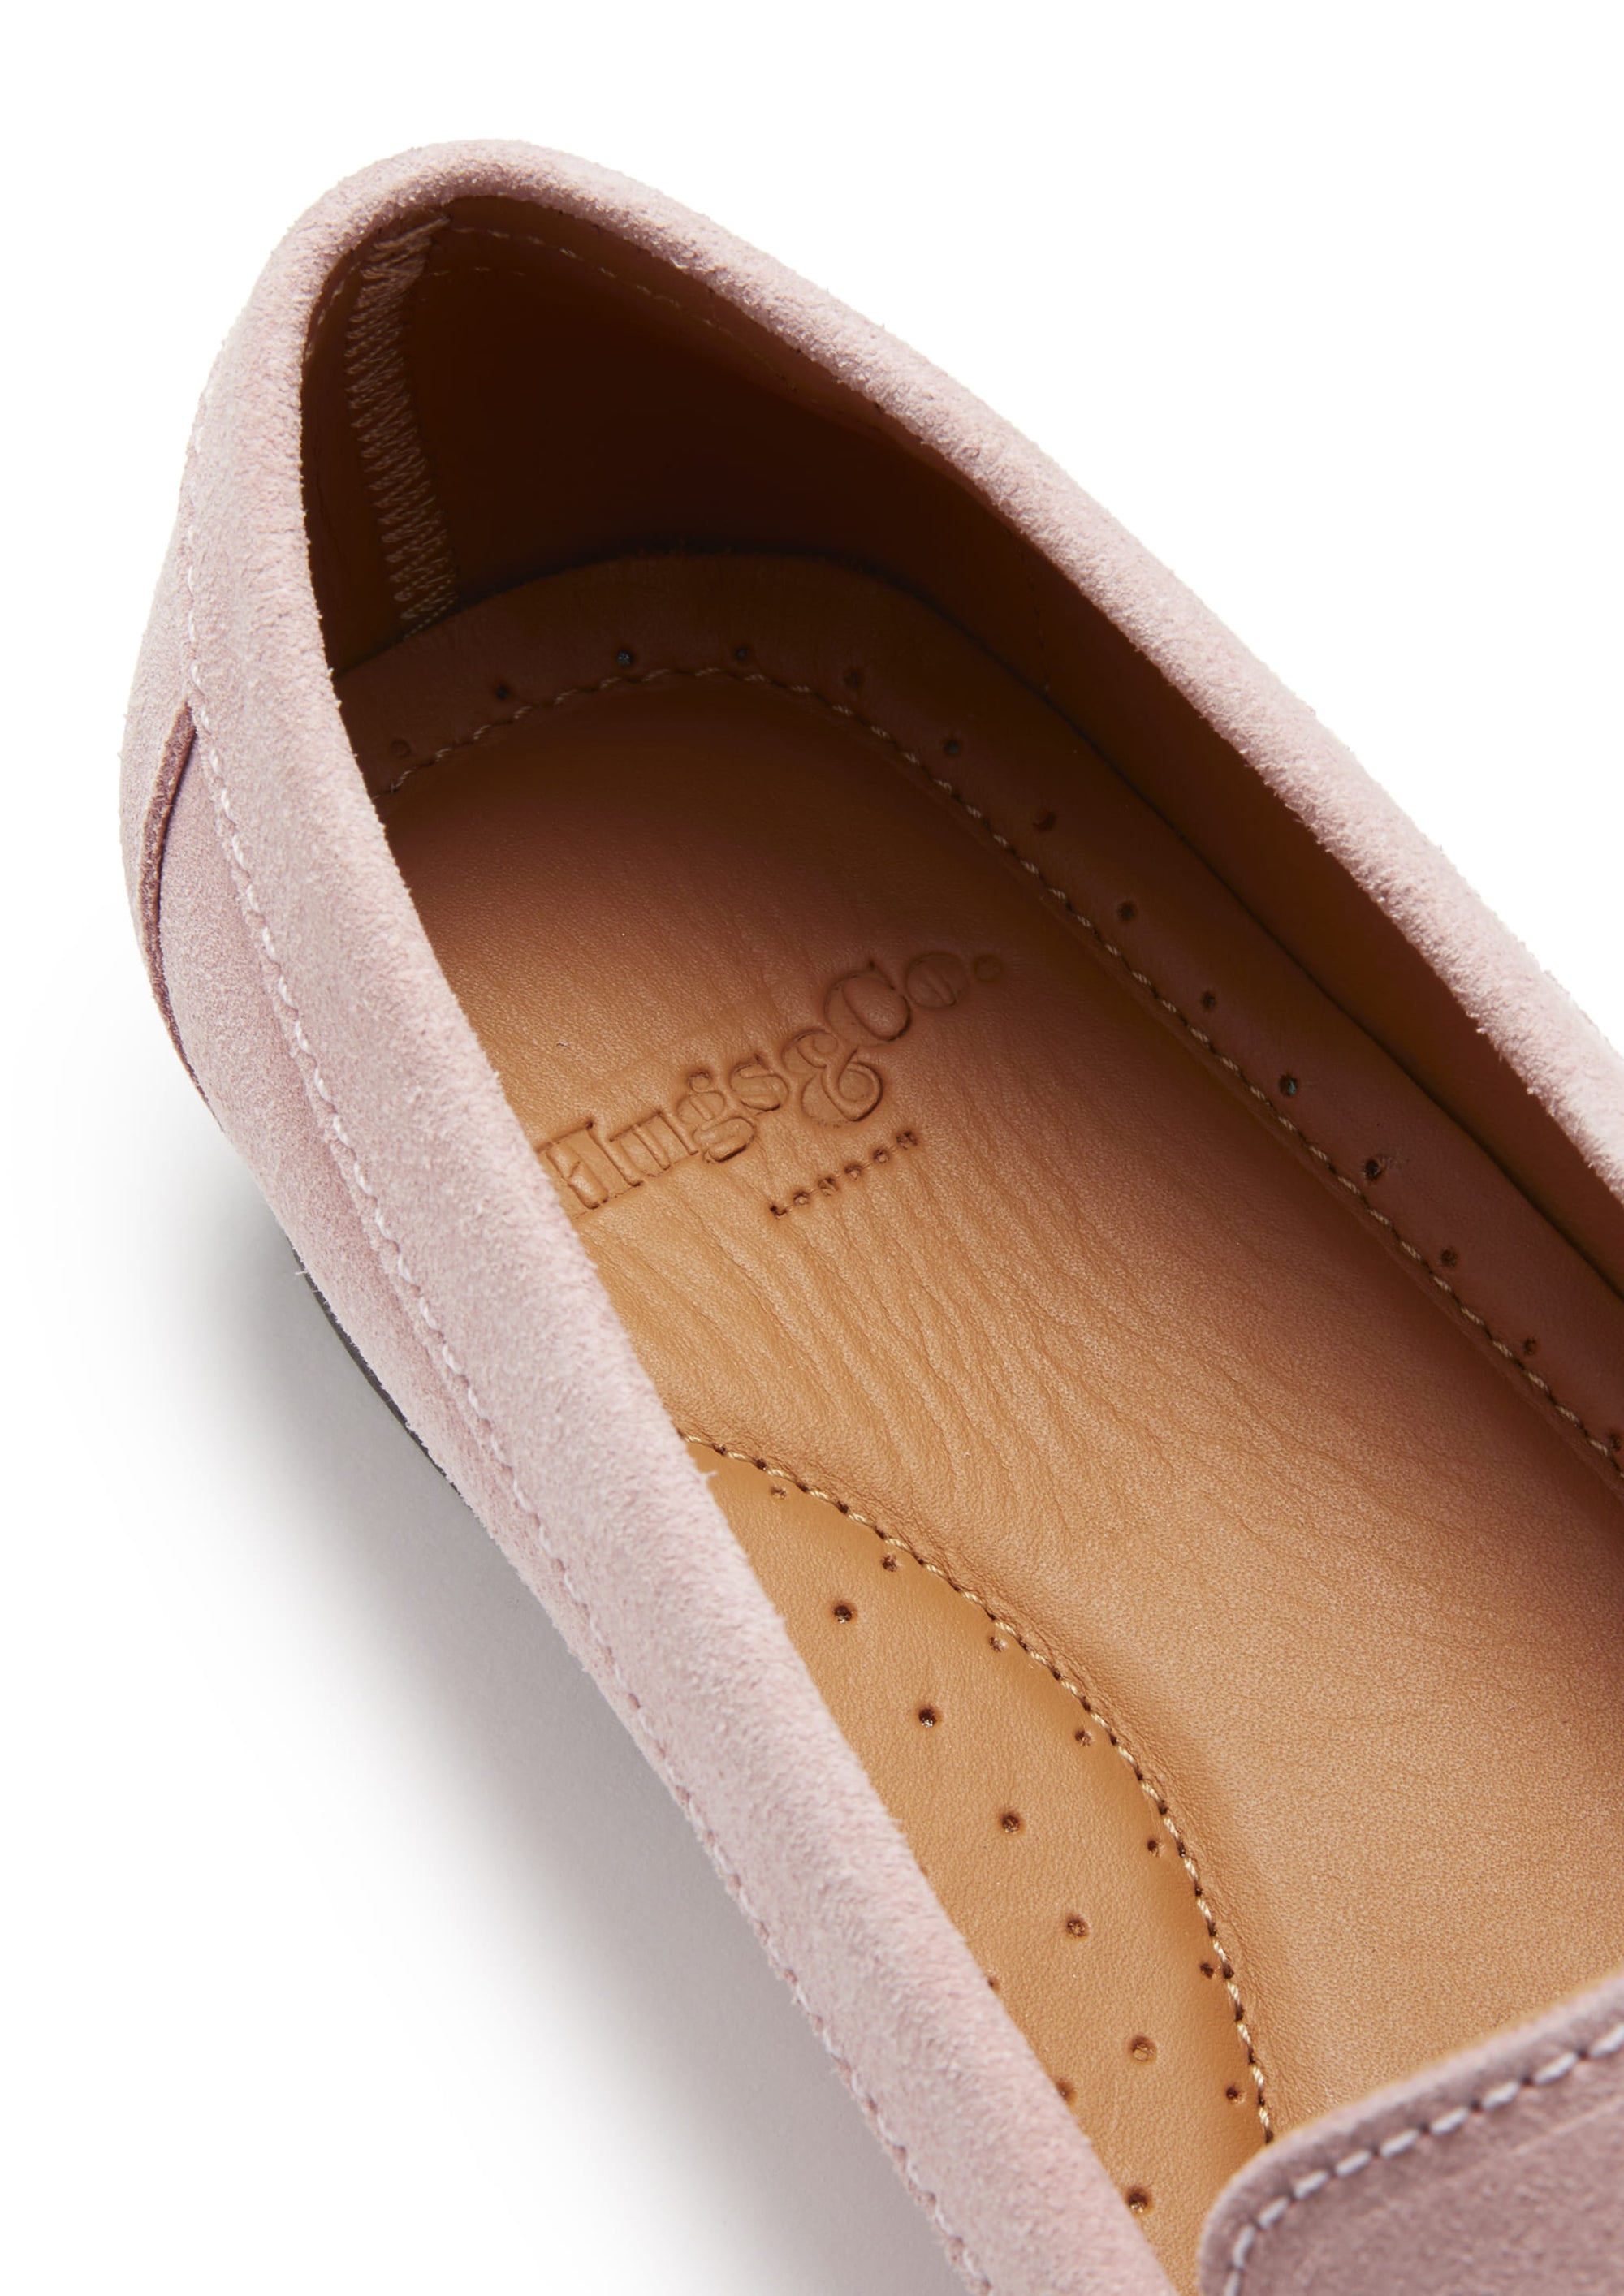 Women's Penny Loafers Leather Sole, ice pink suede